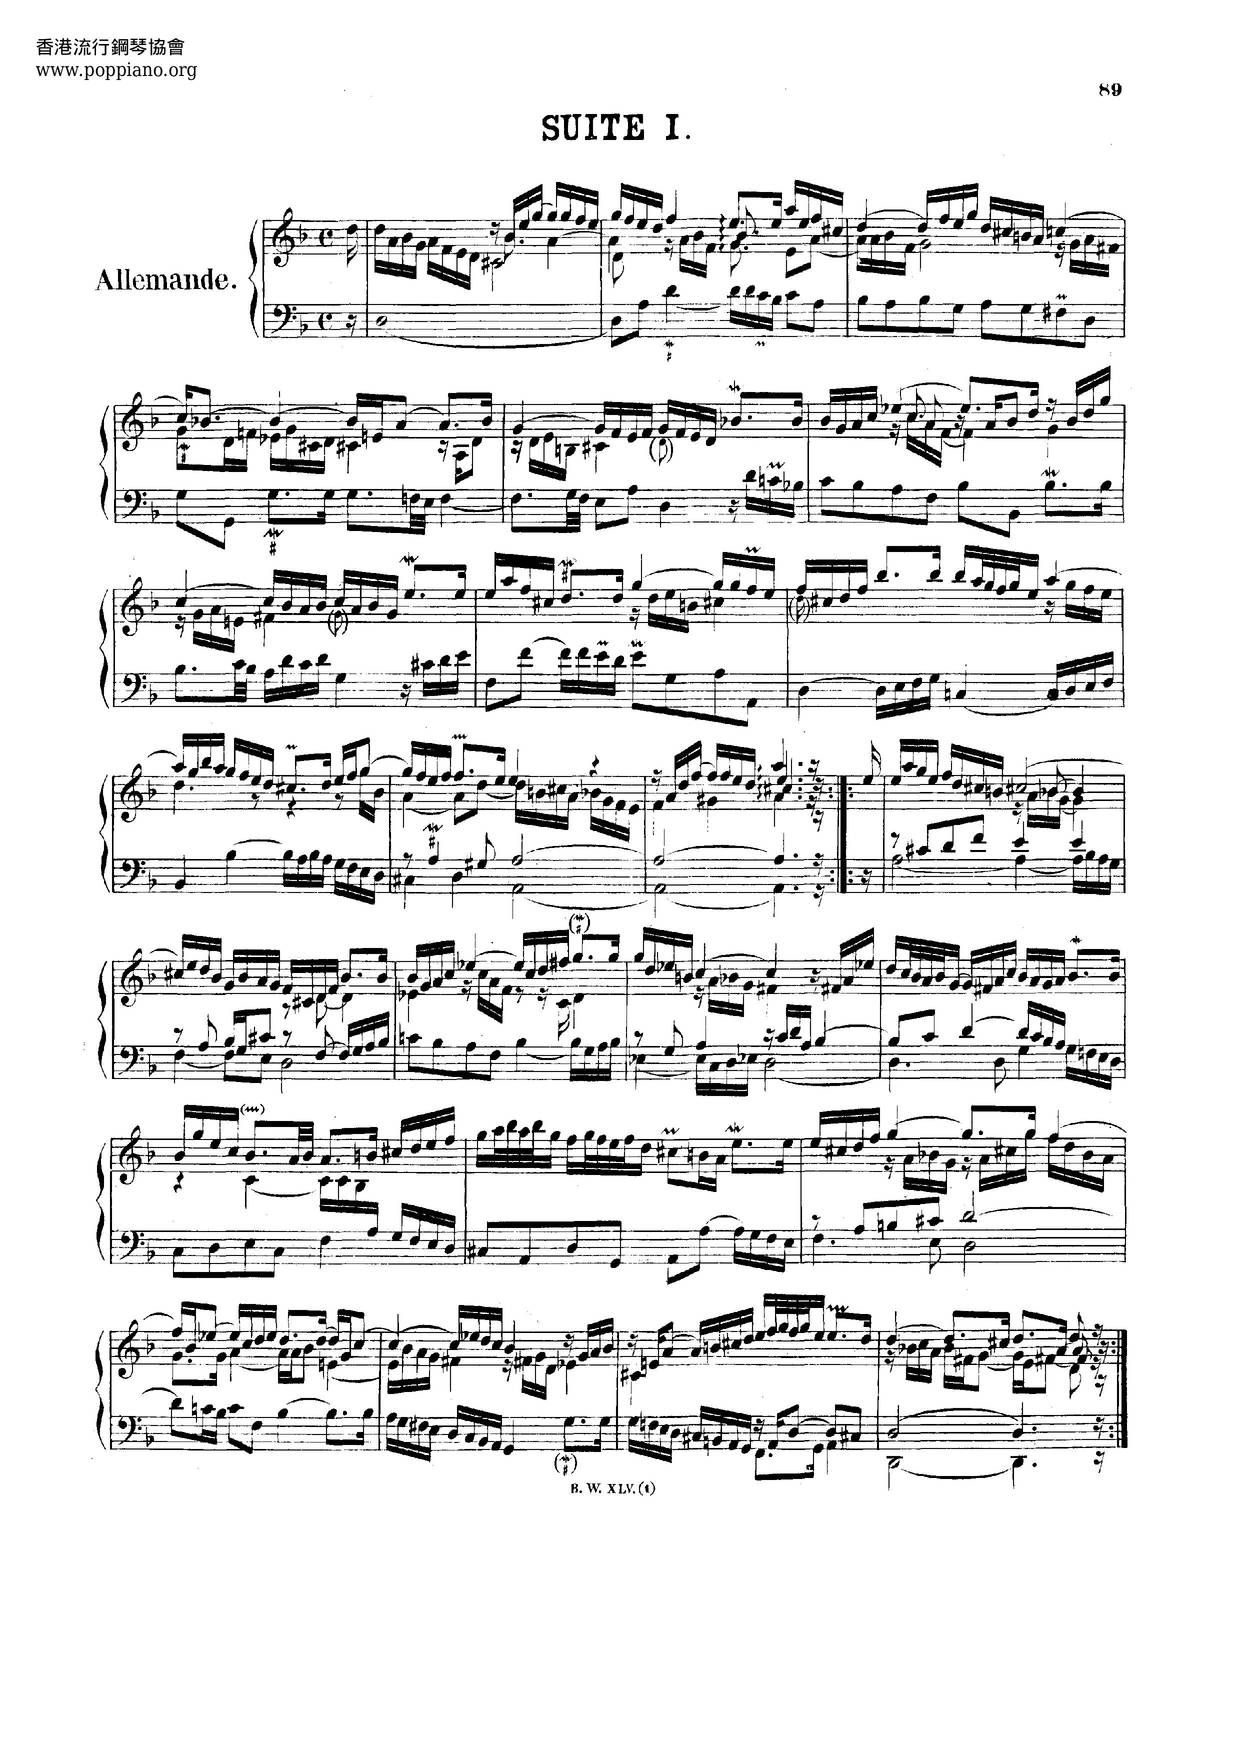 French Suite No. 1 In D Minor, BWV 812 Score